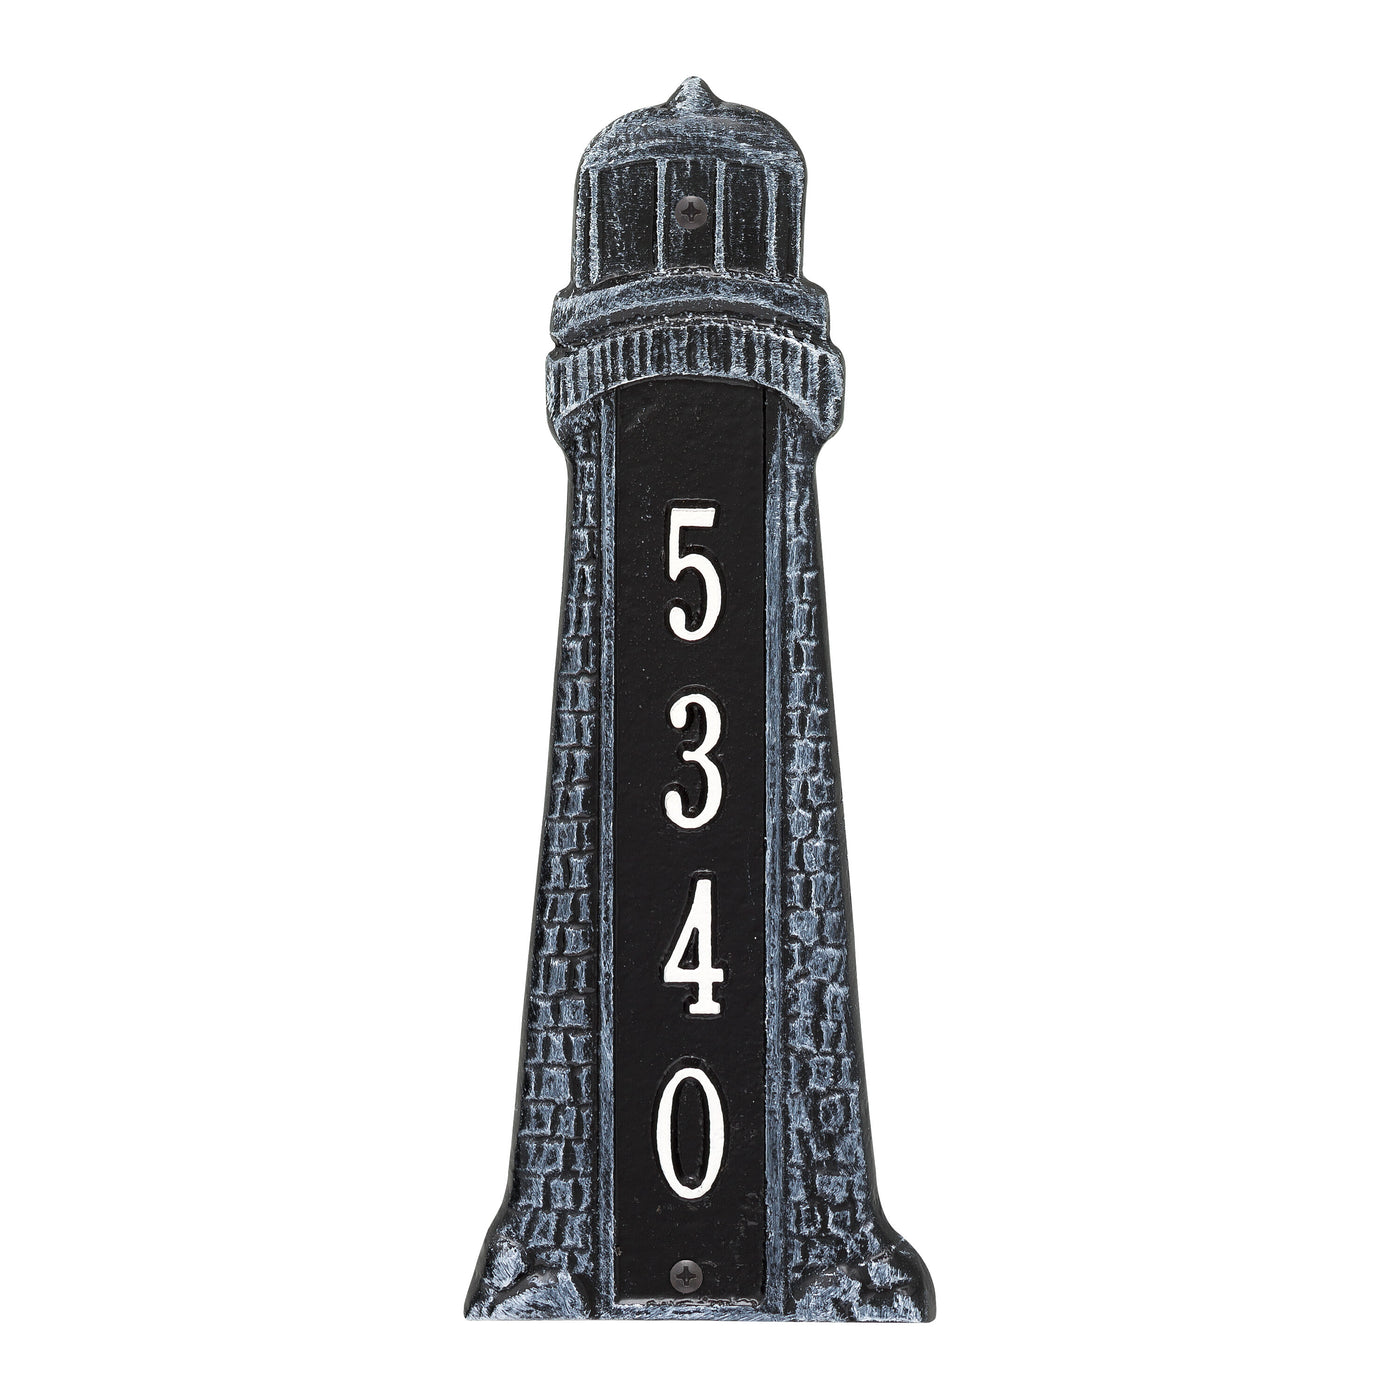 Personalized Lighthouse Vertical - Black/White